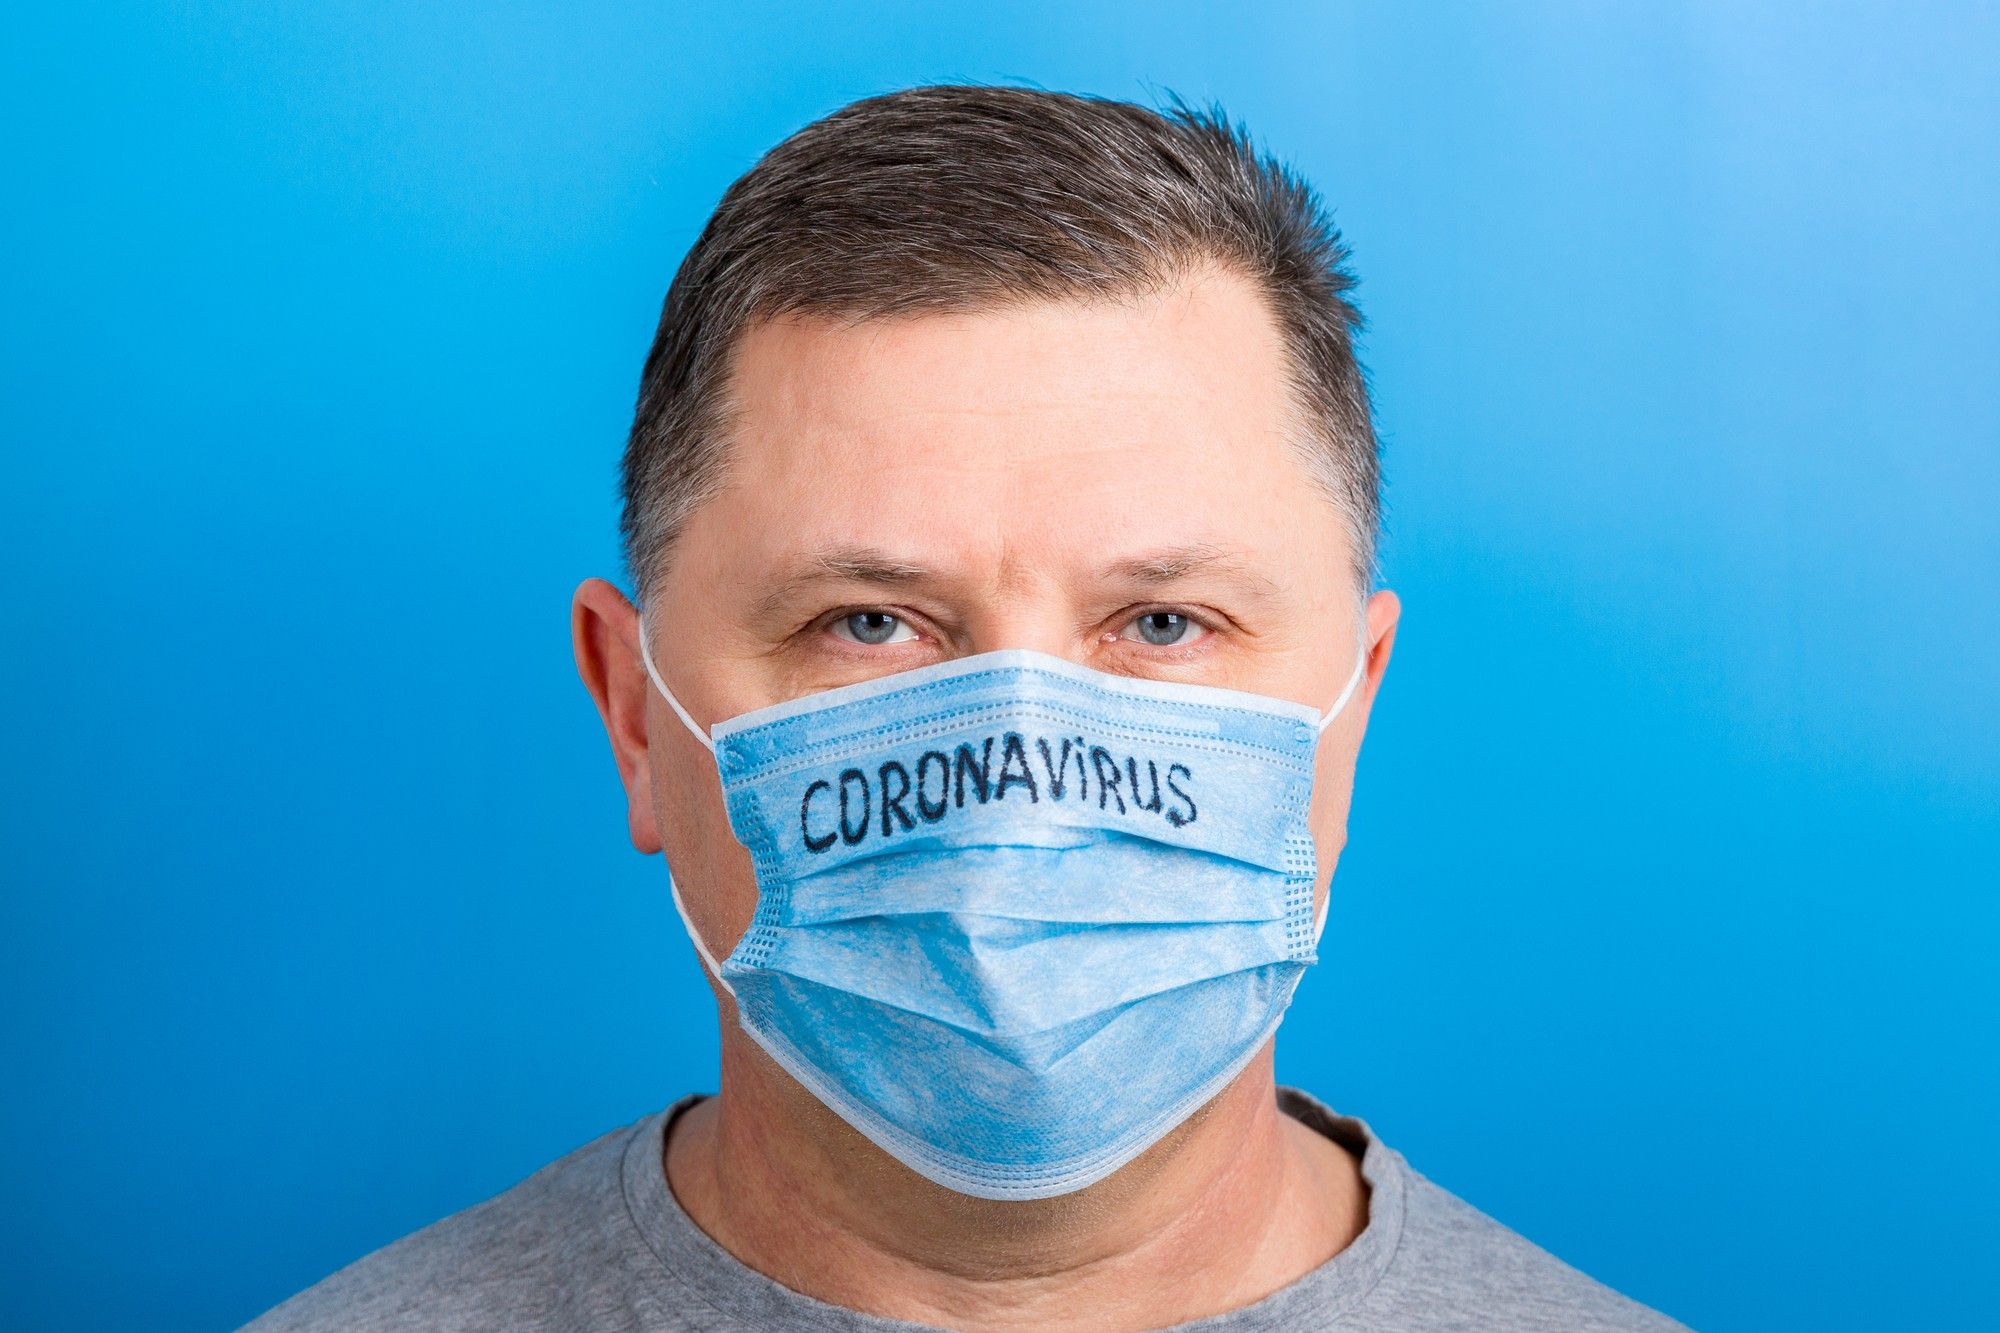 There is no coronavirus cure, and the DoJ will be taking action against fake cure claims.